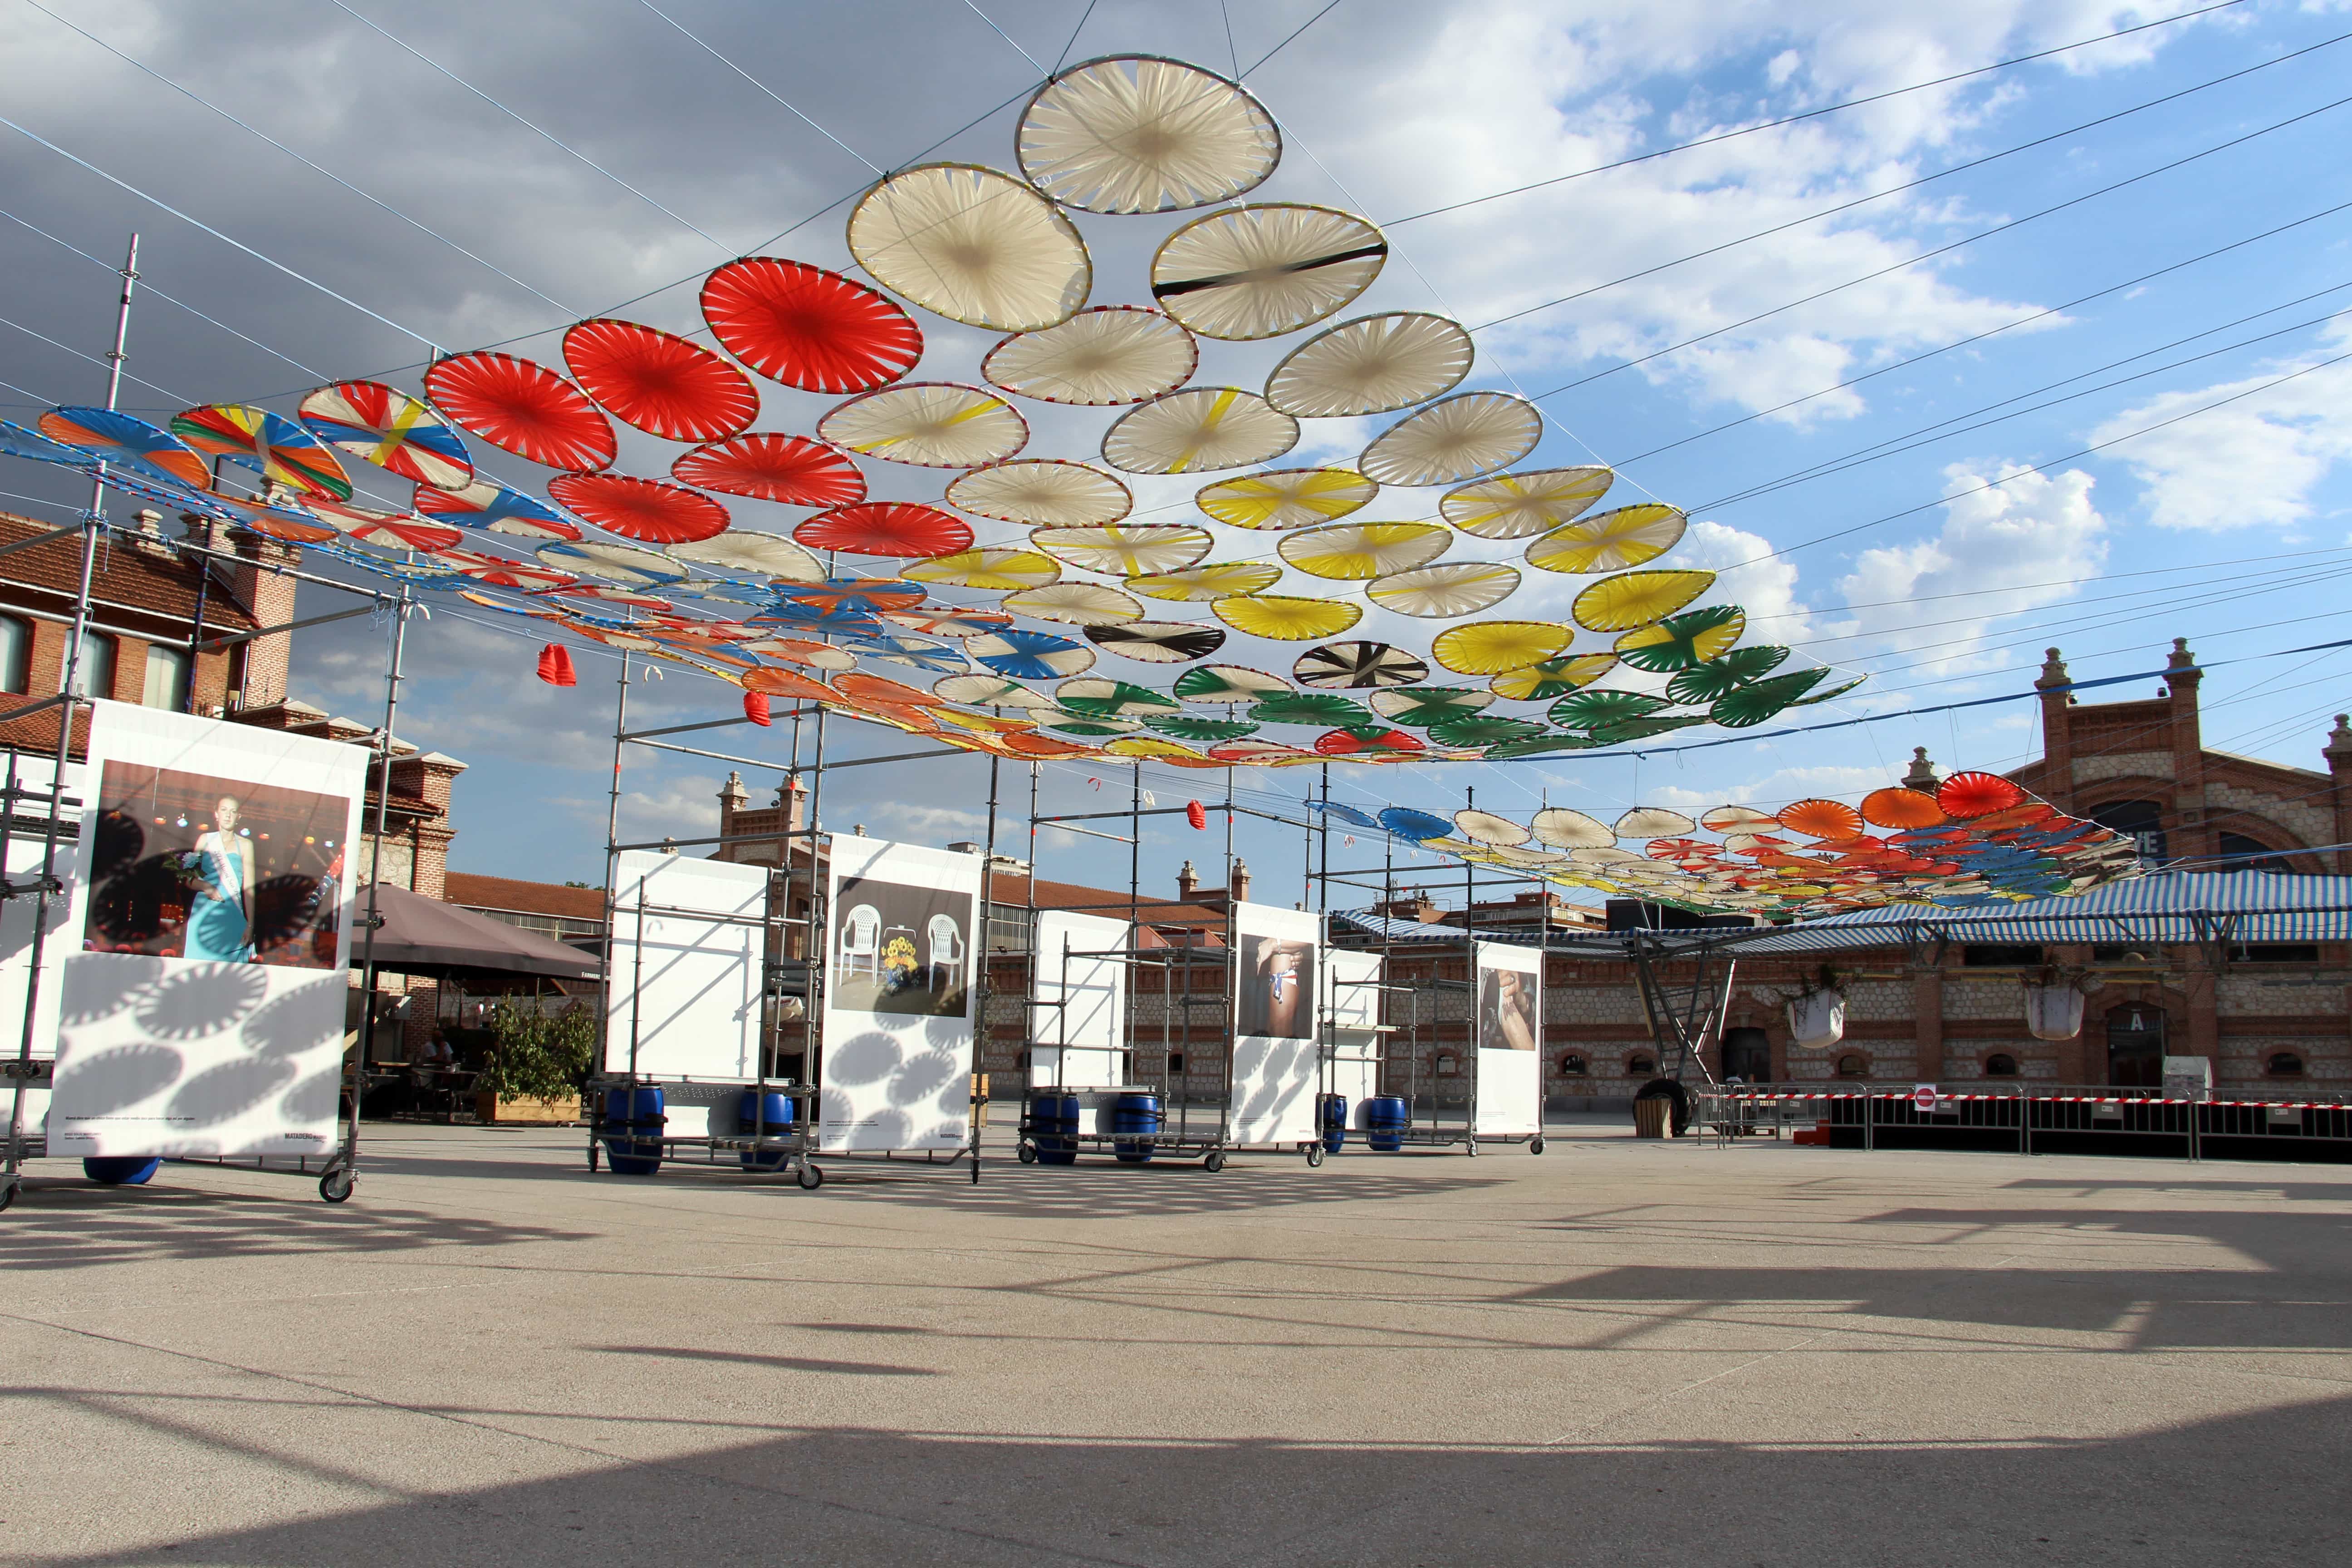 Matadero de Madrid, places to visit in Madrid, Madrid travel guide, things to do in Madrid